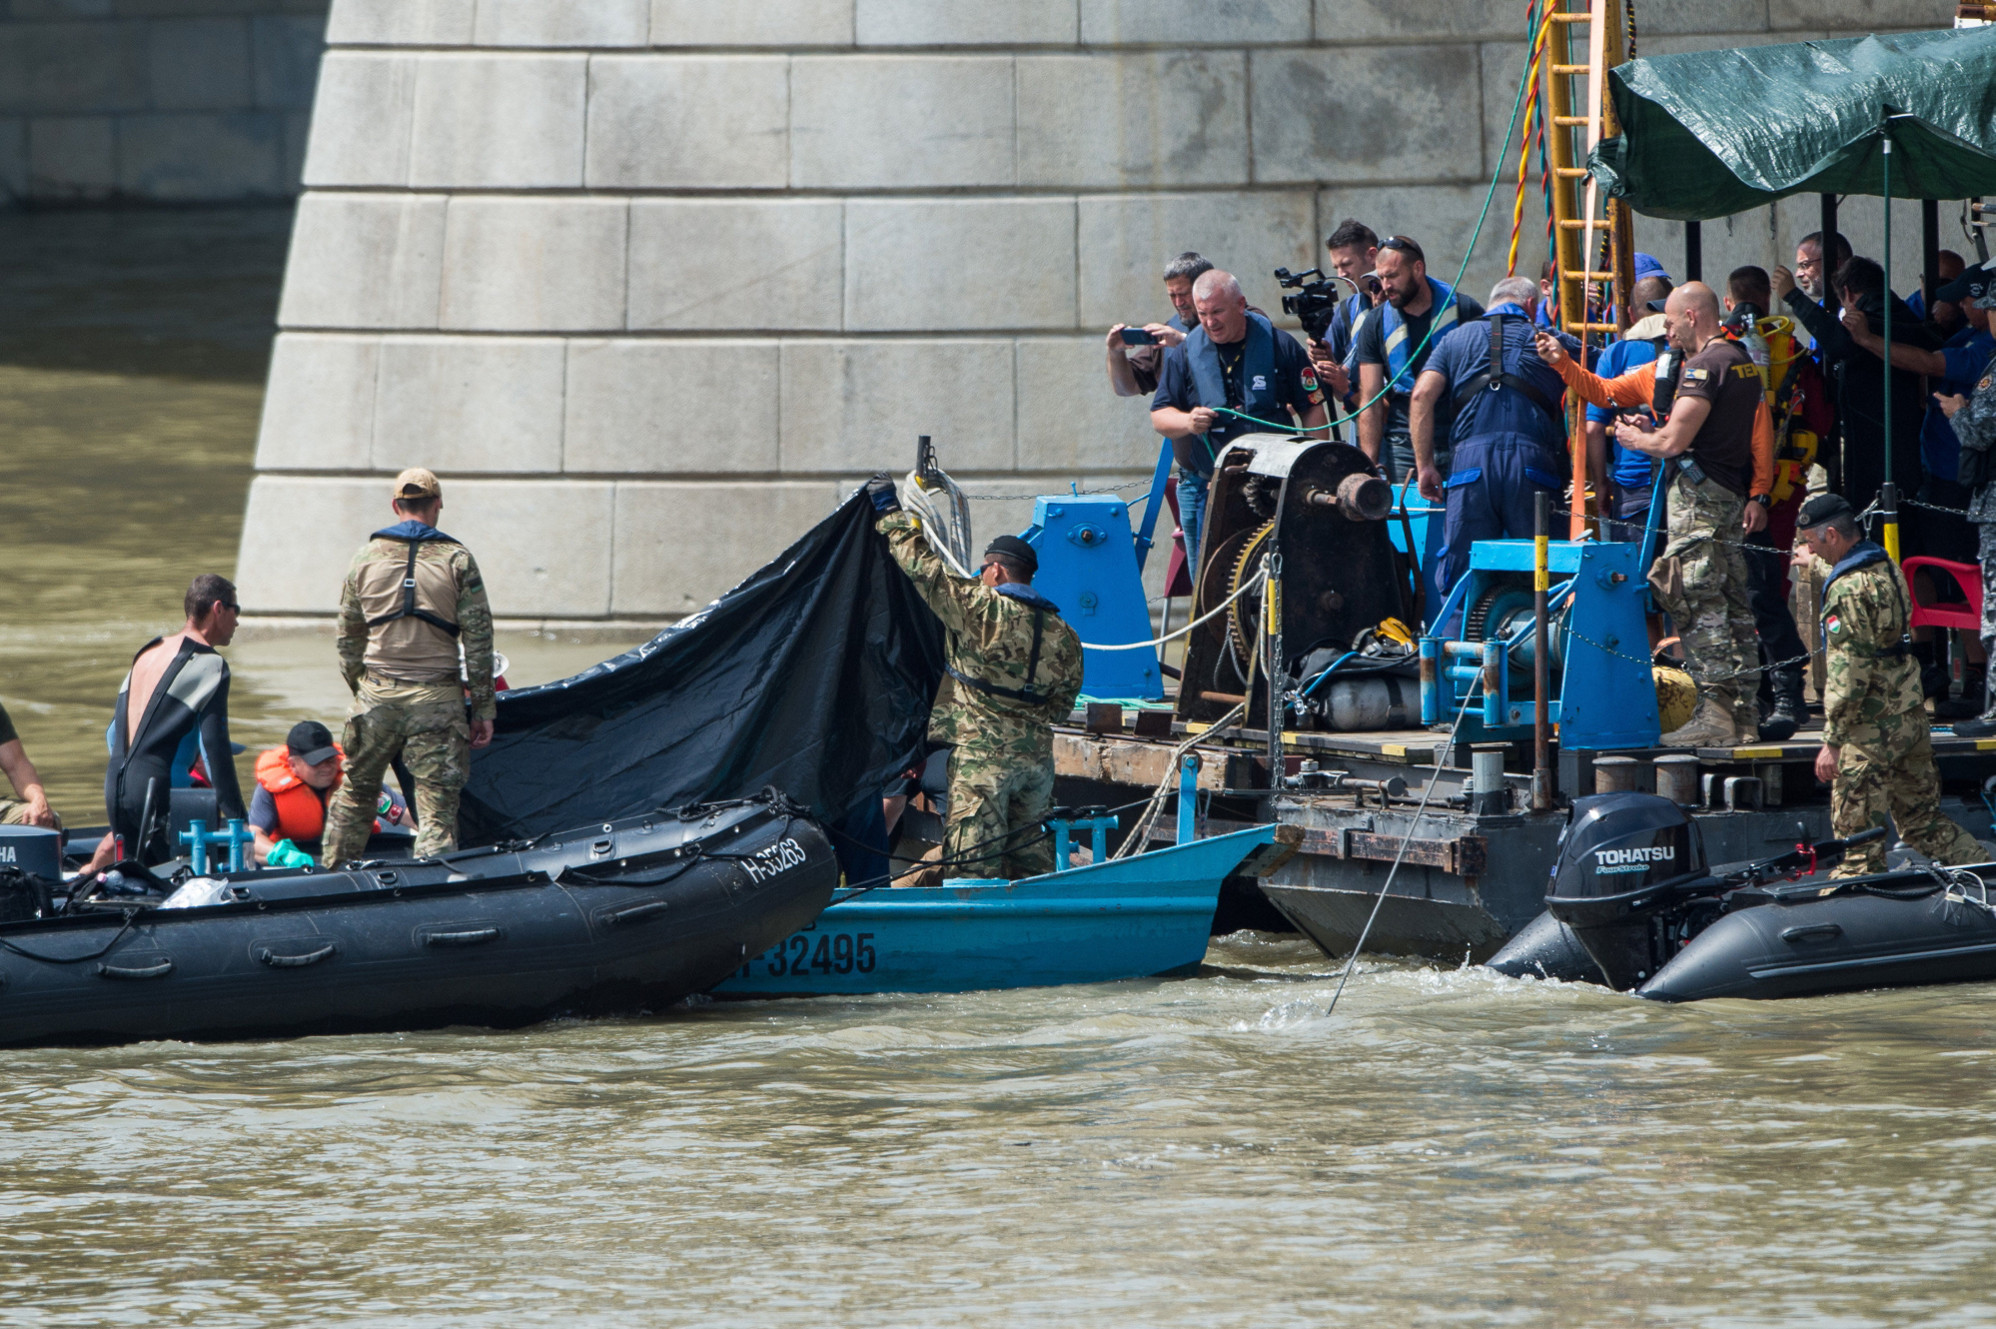 Video: Another Two Victims Of Budapest Ship Collision Found